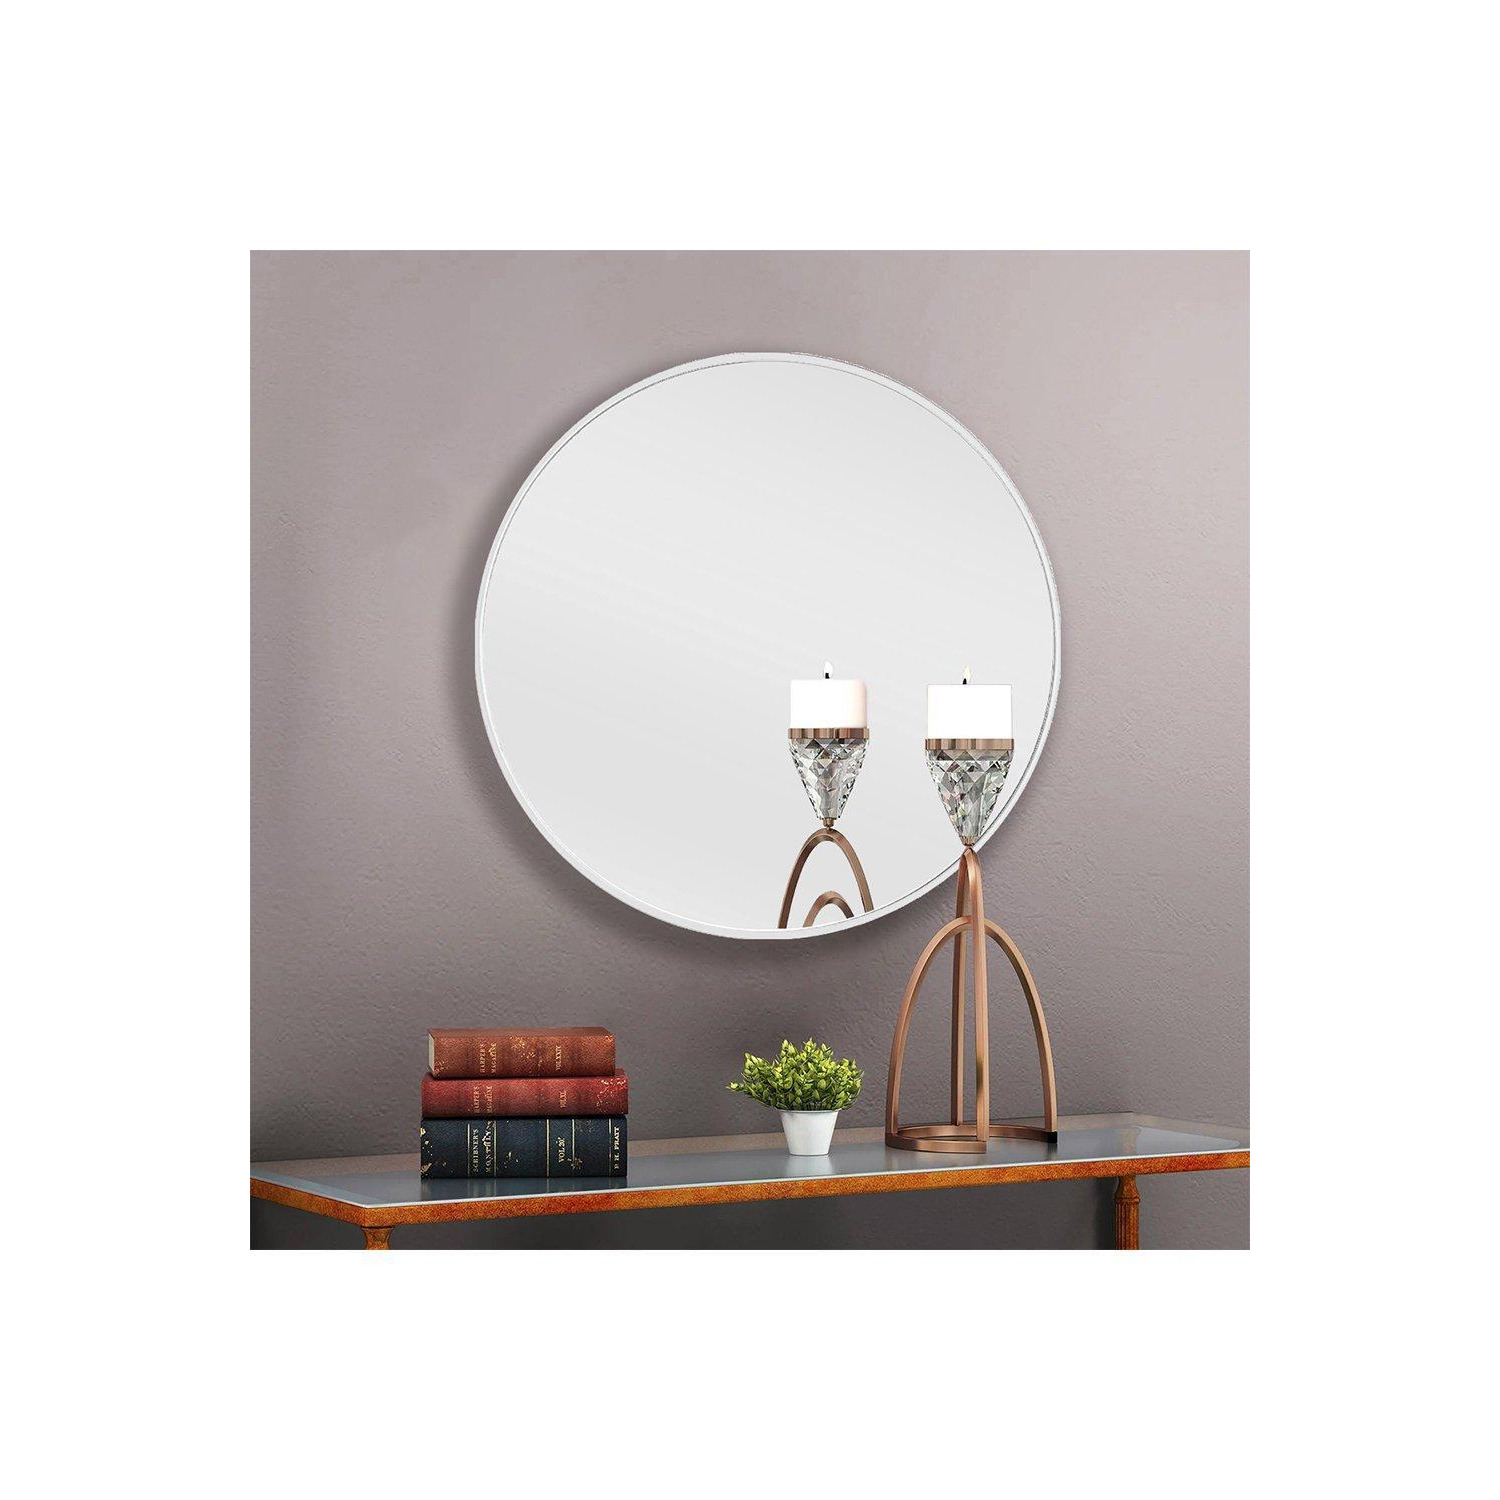 50cm Dia Nordic Round Wall Mirror with White Frame - image 1